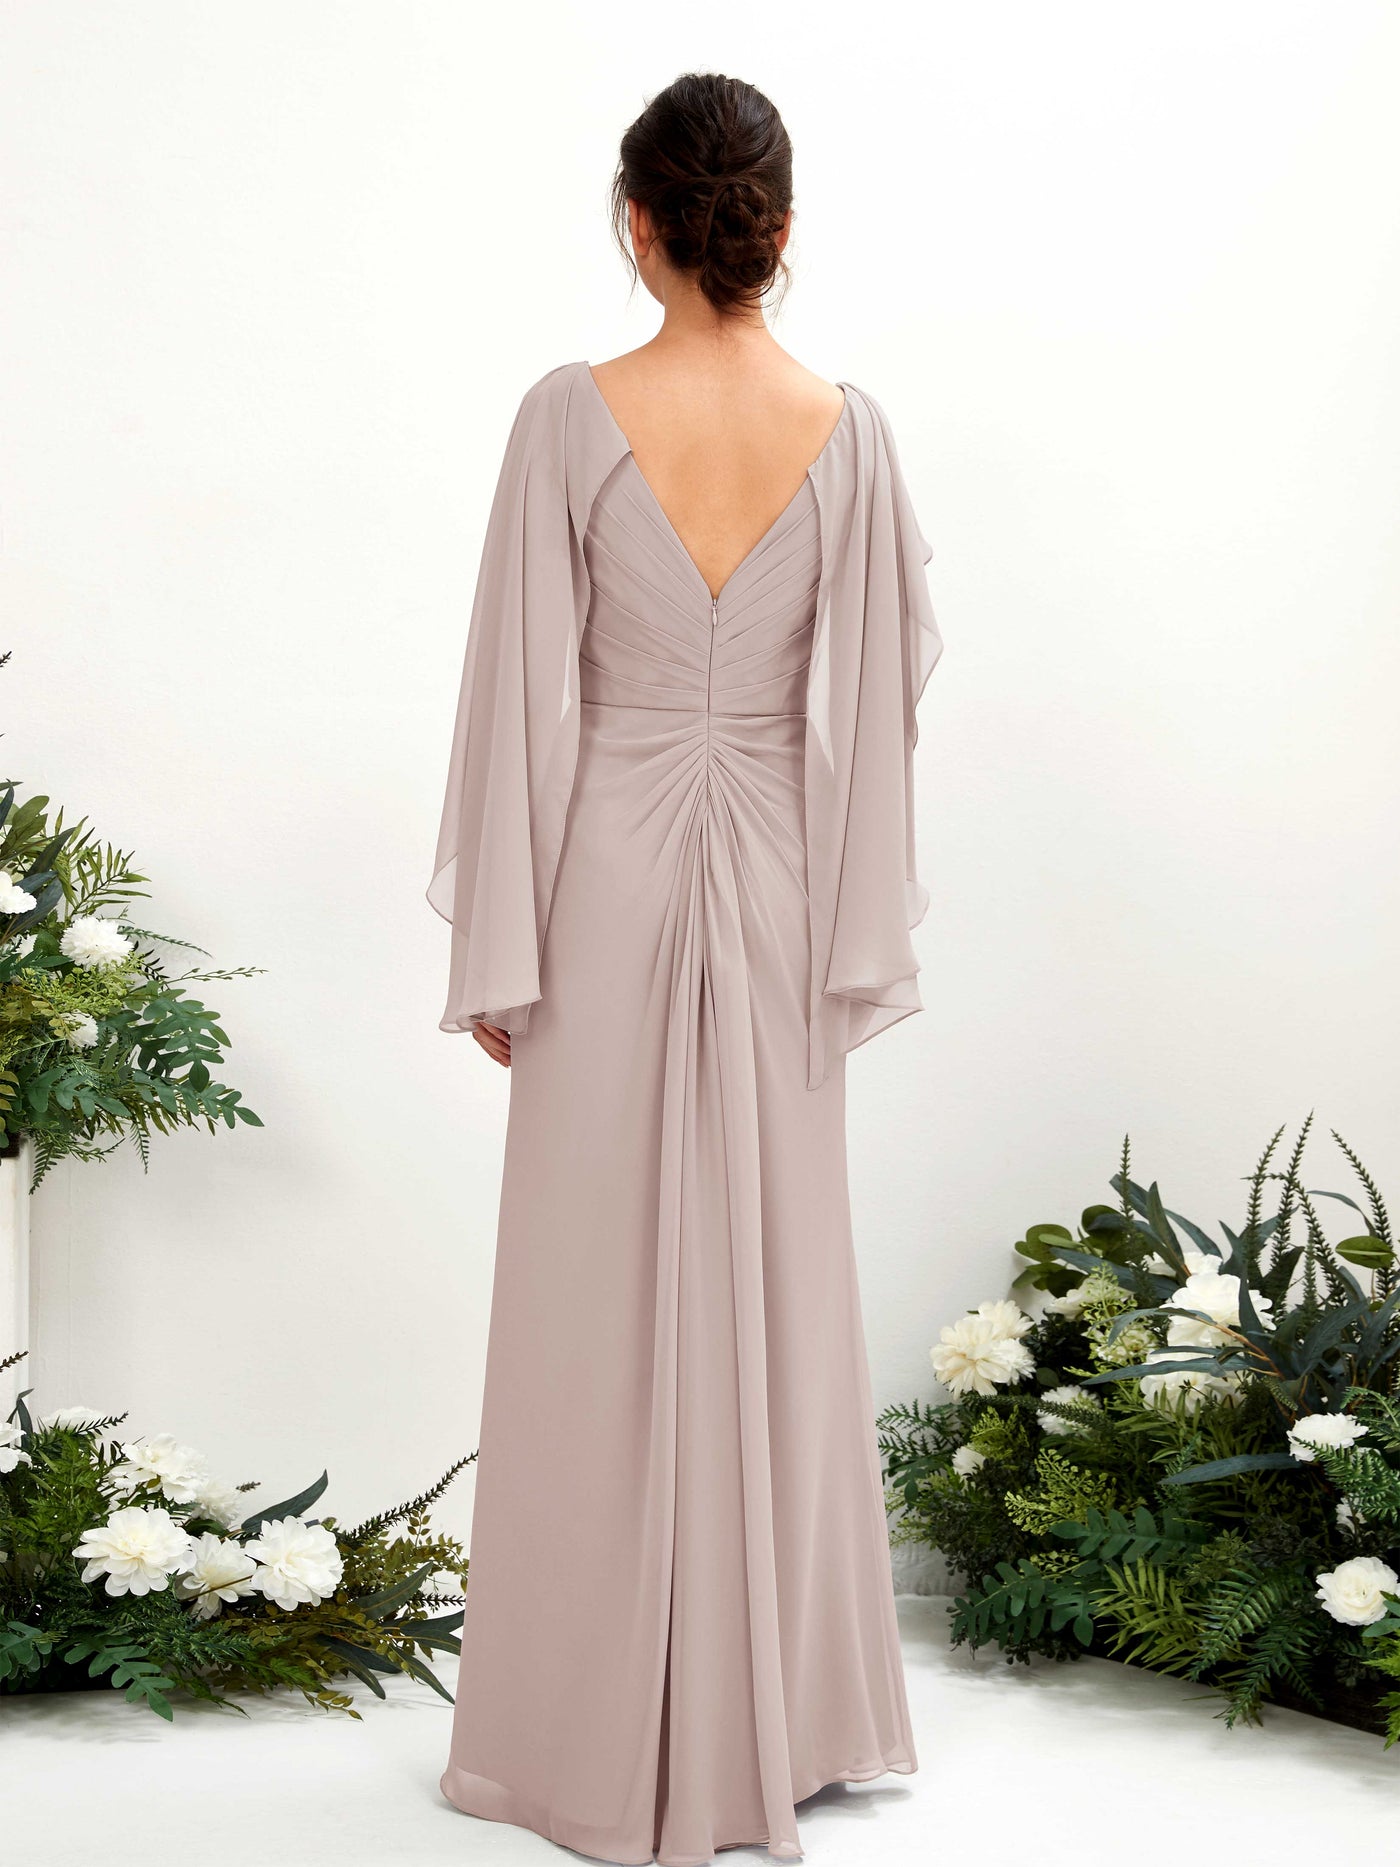 Taupe Bridesmaid Dresses Bridesmaid Dress A-line Chiffon Straps Full Length Long Sleeves Wedding Party Dress (80220124)#color_taupe